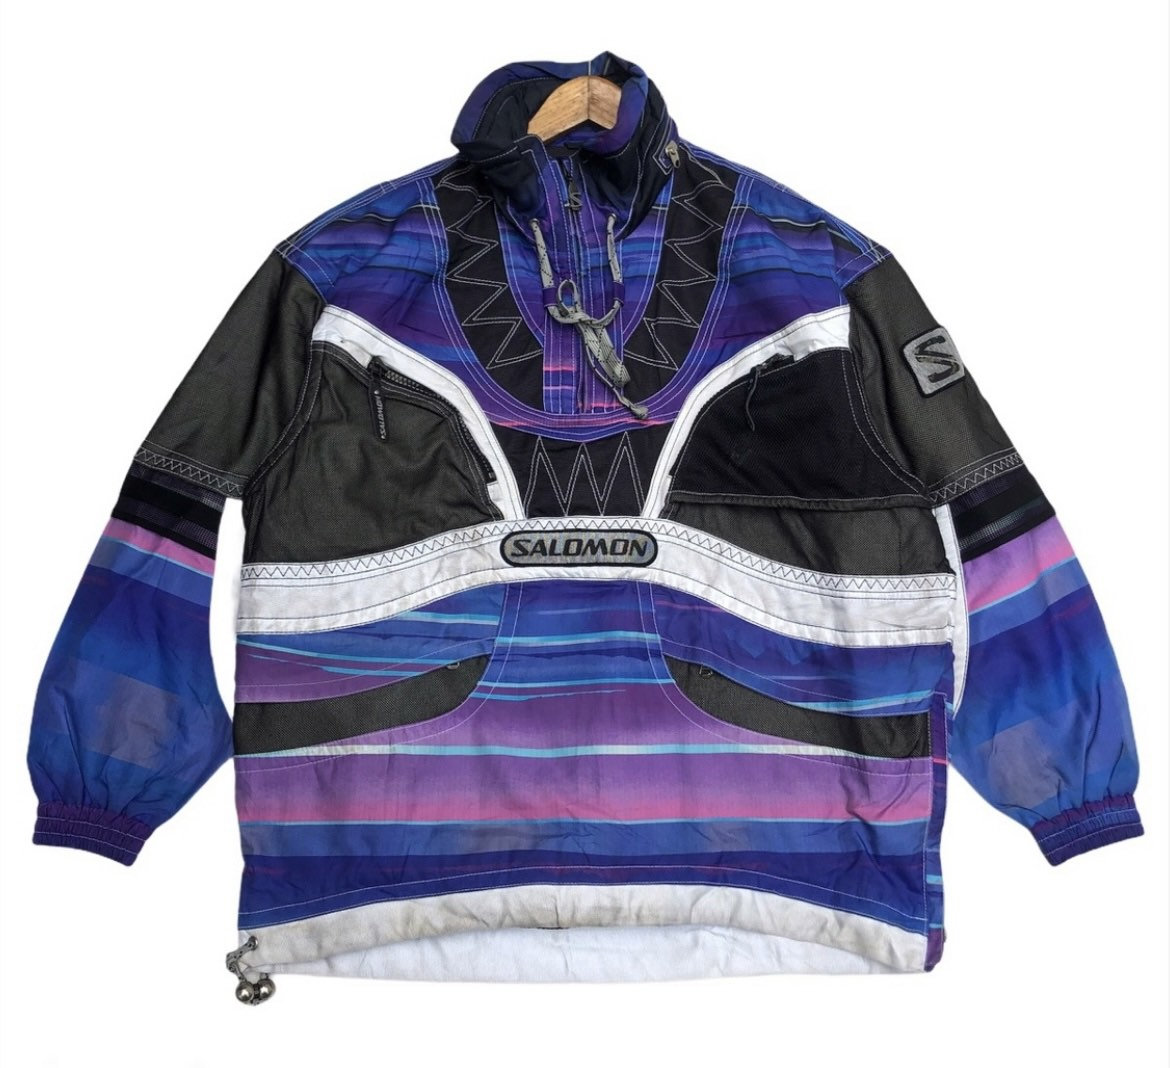 Vintage 90s SALOMON Ski Wear Competition Racing Jacket Hoodie Racing Full  Zipper Multi Colour Abstract Block Design Size Large